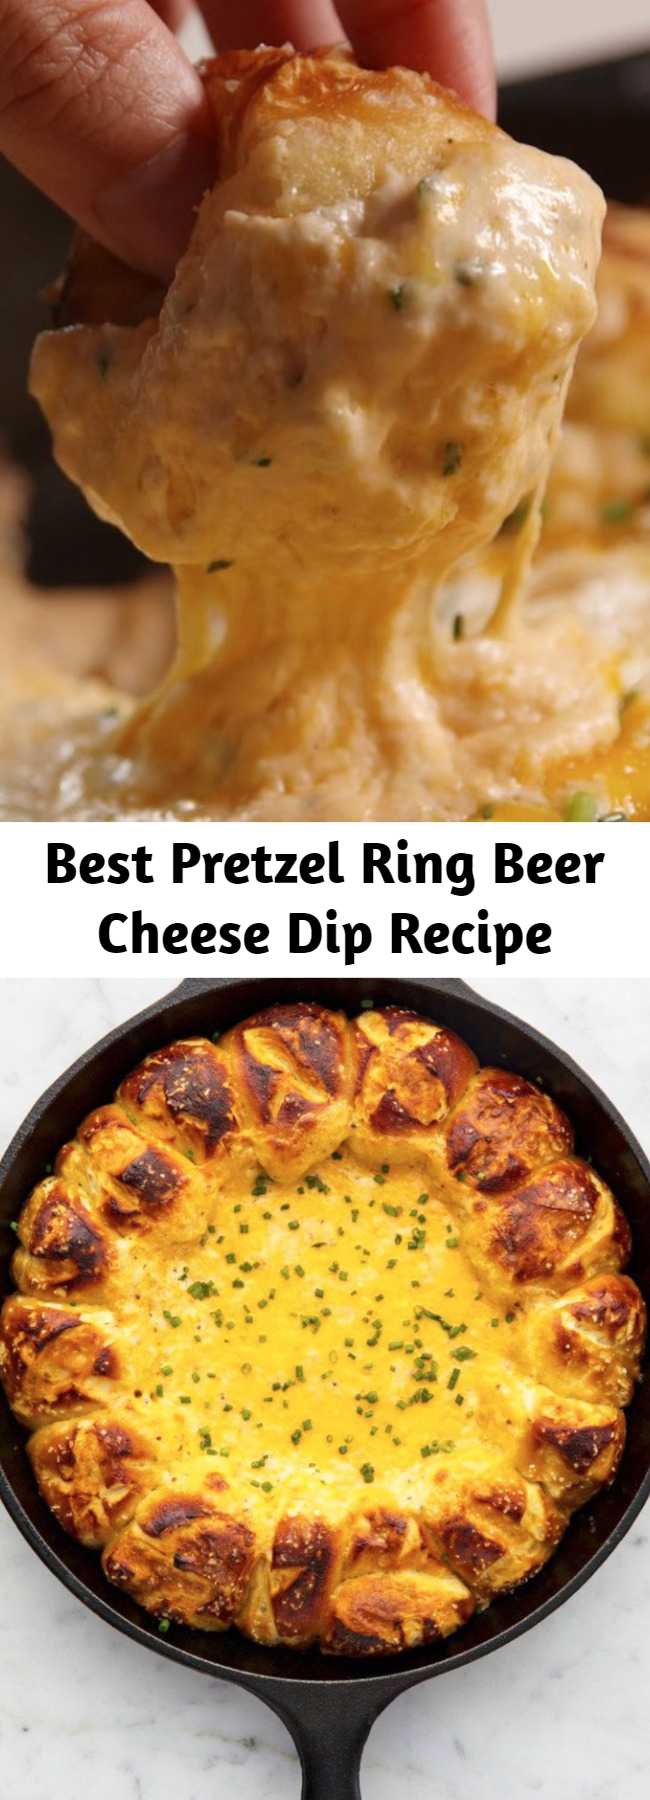 Best Pretzel Ring Beer Cheese Dip Recipe - Looking for an beer cheese dip recipe? This recipe combines cheddar, pale ale, cream cheese, and garlic to make the BEST beer cheese ever. If you want to take it a step further, serve it in a ring of pretzeled store-bought biscuits.